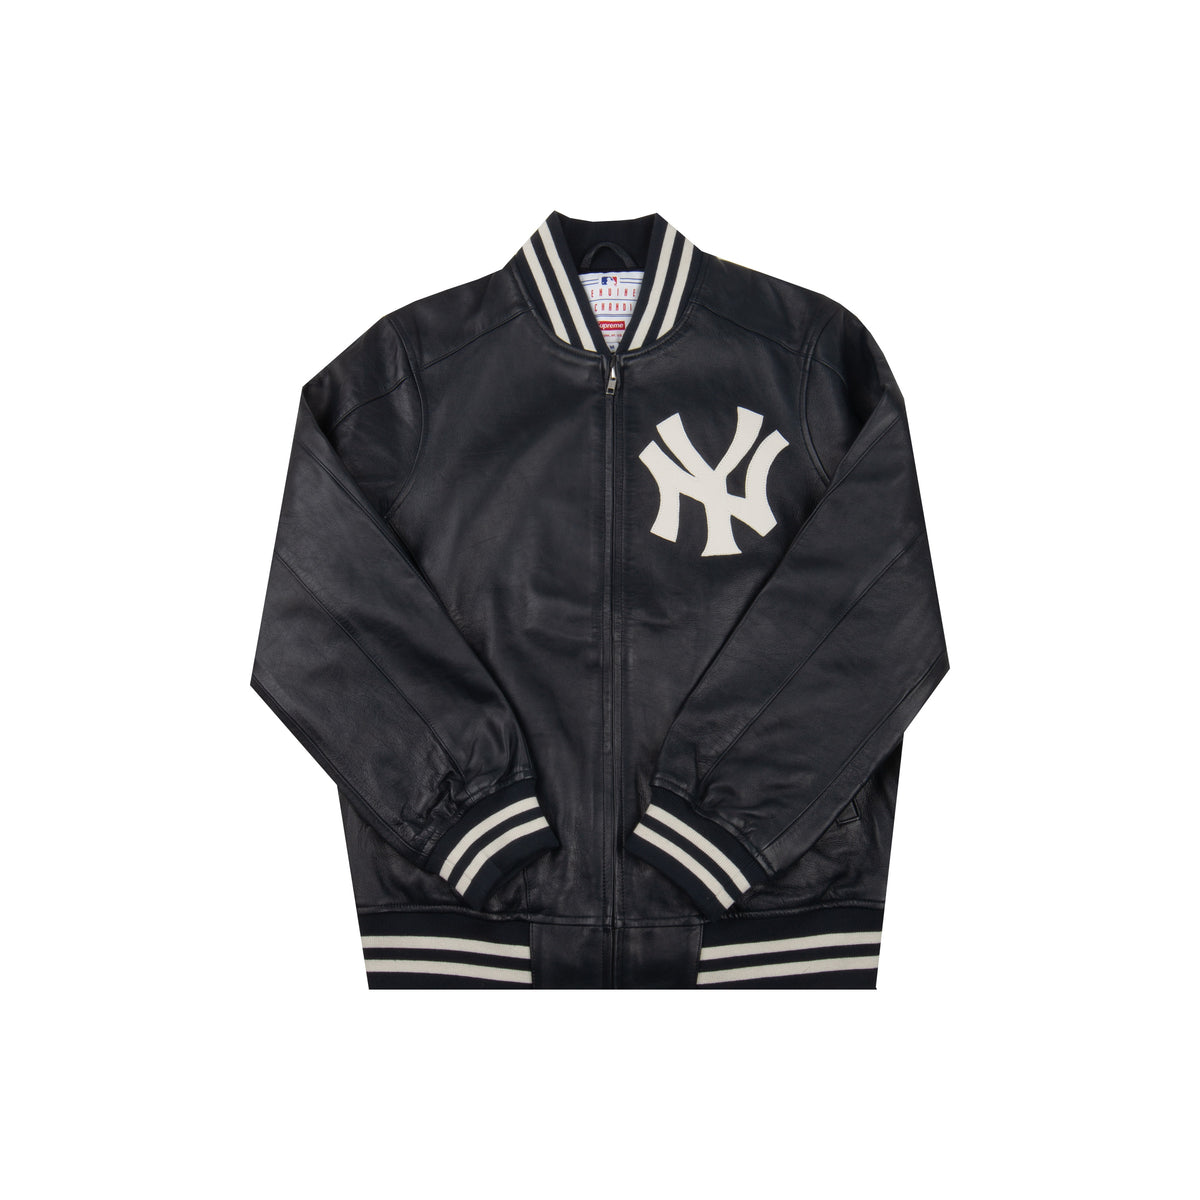 Supreme Navy Yankees Leather Jacket – On The Arm